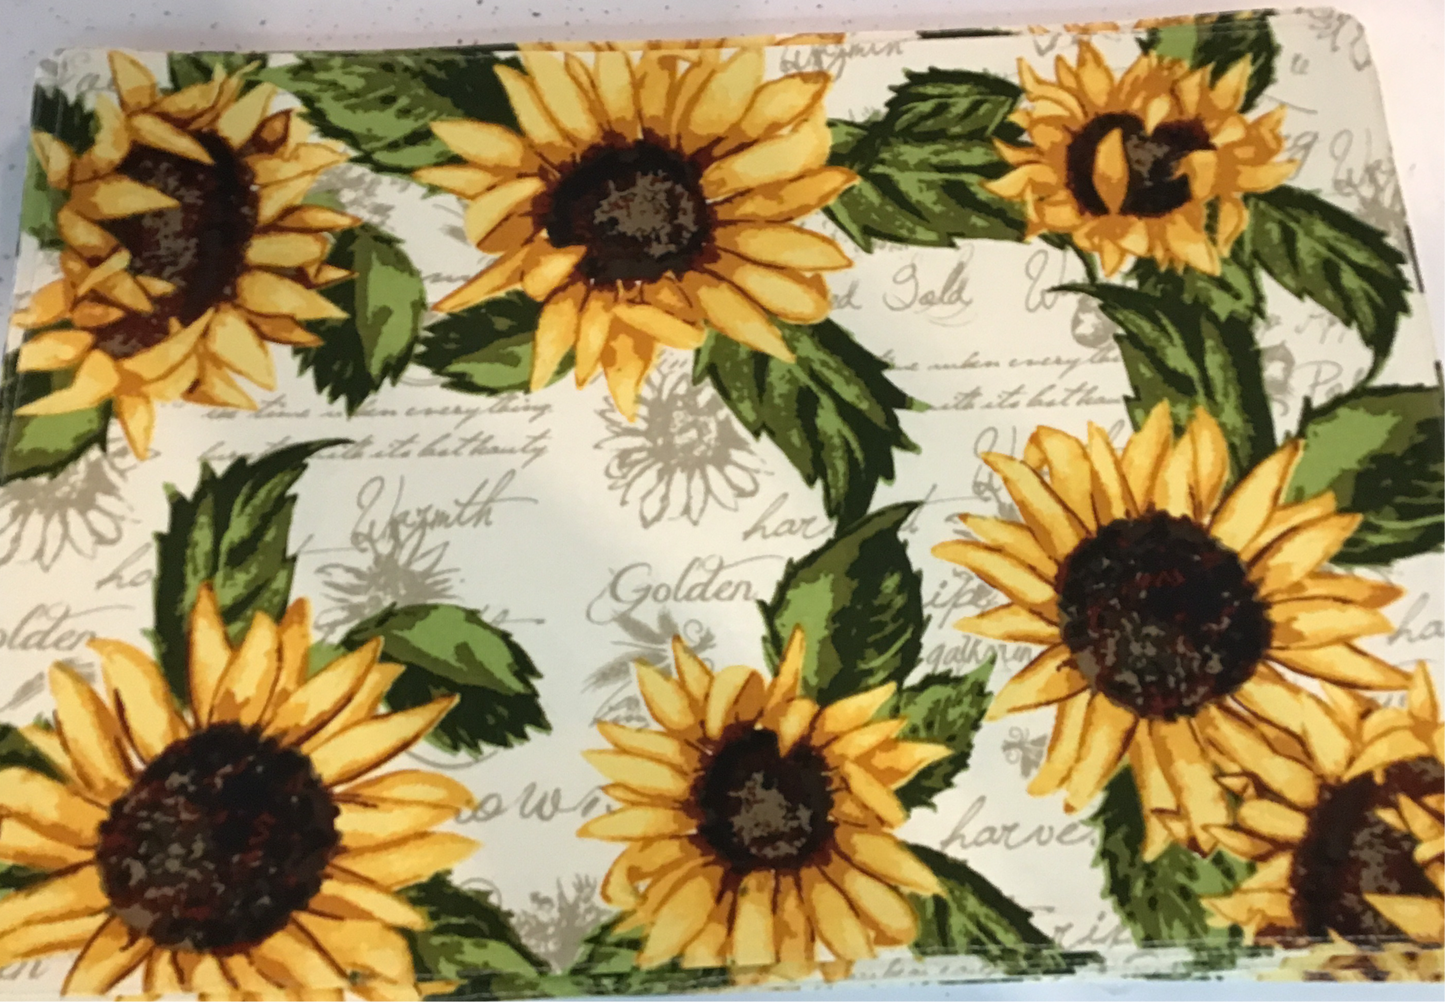 Rustic Sunflower Placemat